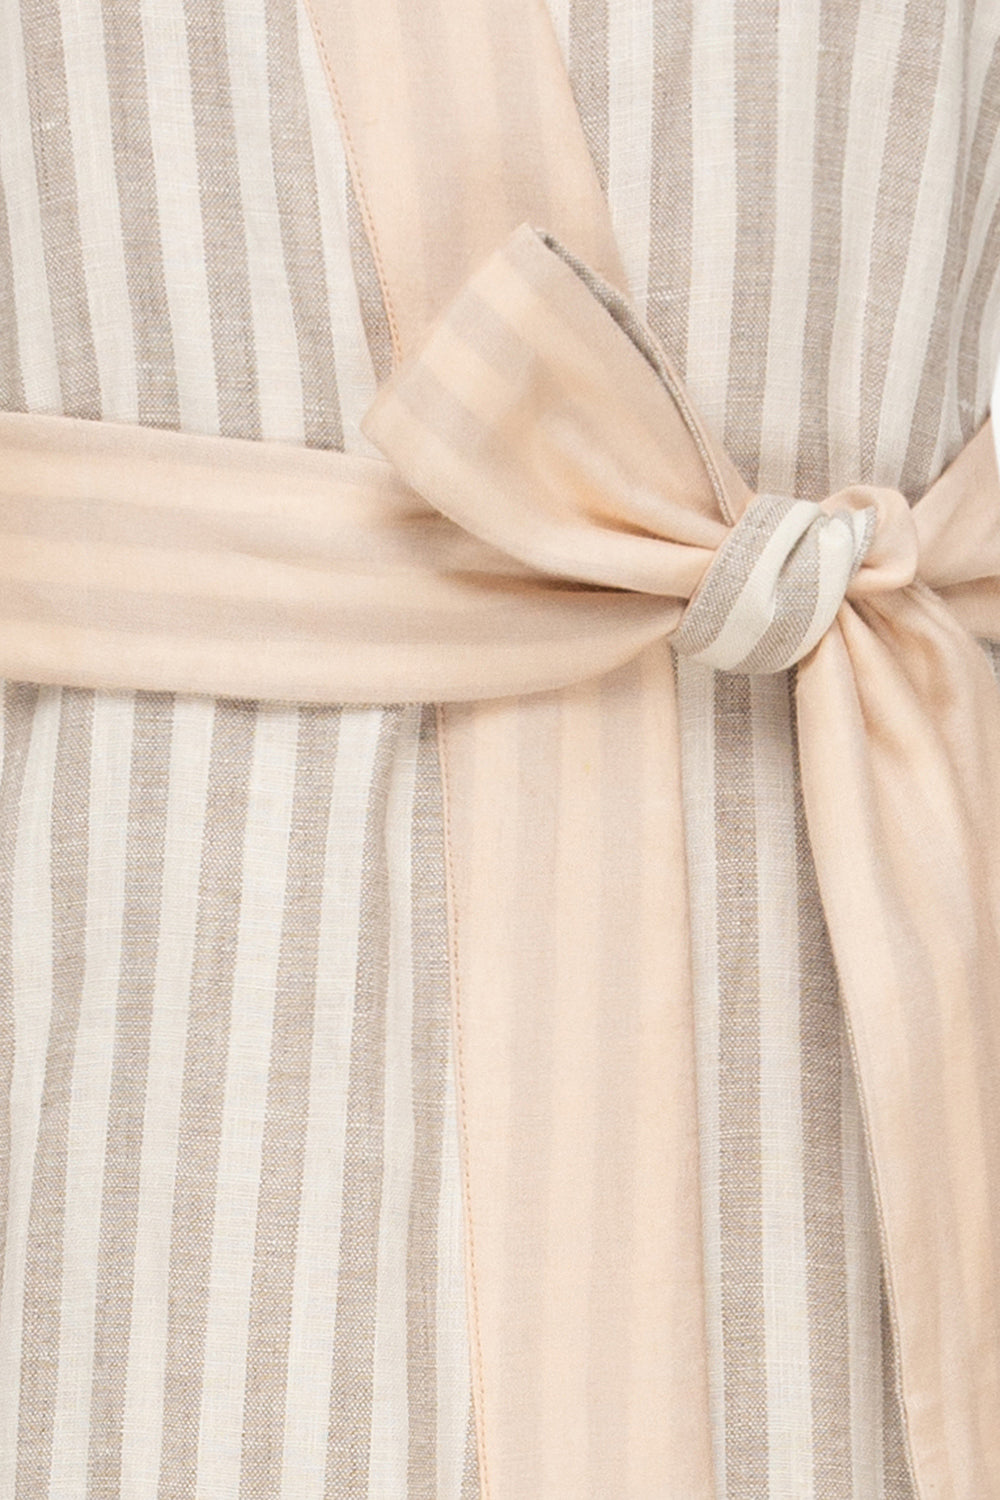 Pacific Robe in Dusted Lines on Peach